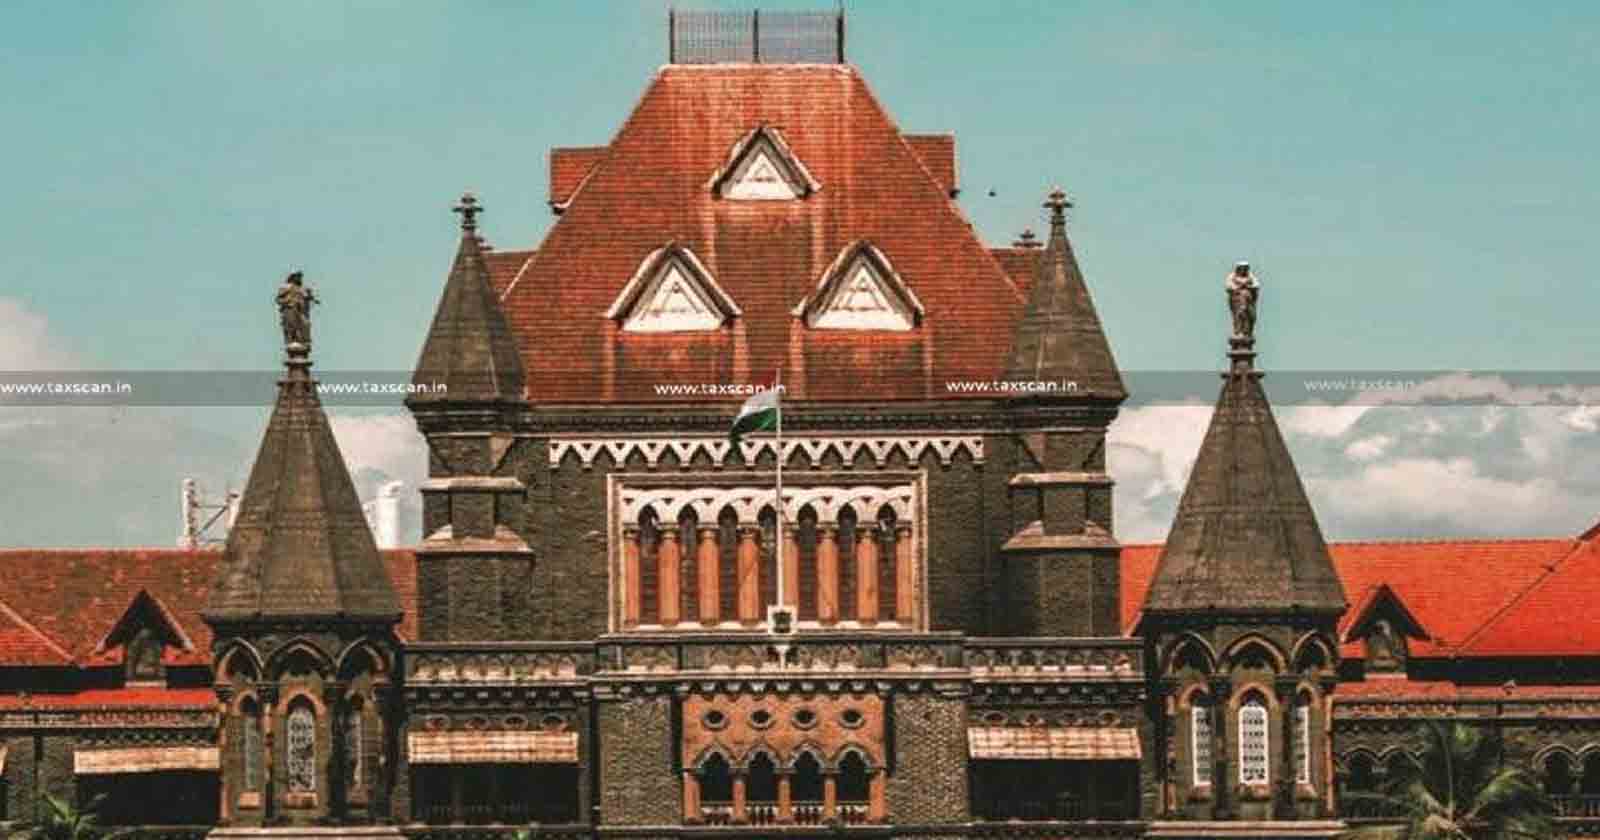 Parties Seeking Stay on LOC - LOC Required to Apply to Court - Bombay High Court Imposes Costs of Rs 50,000 on Late Filing - Bombay High Court - Late Filing - taxscan